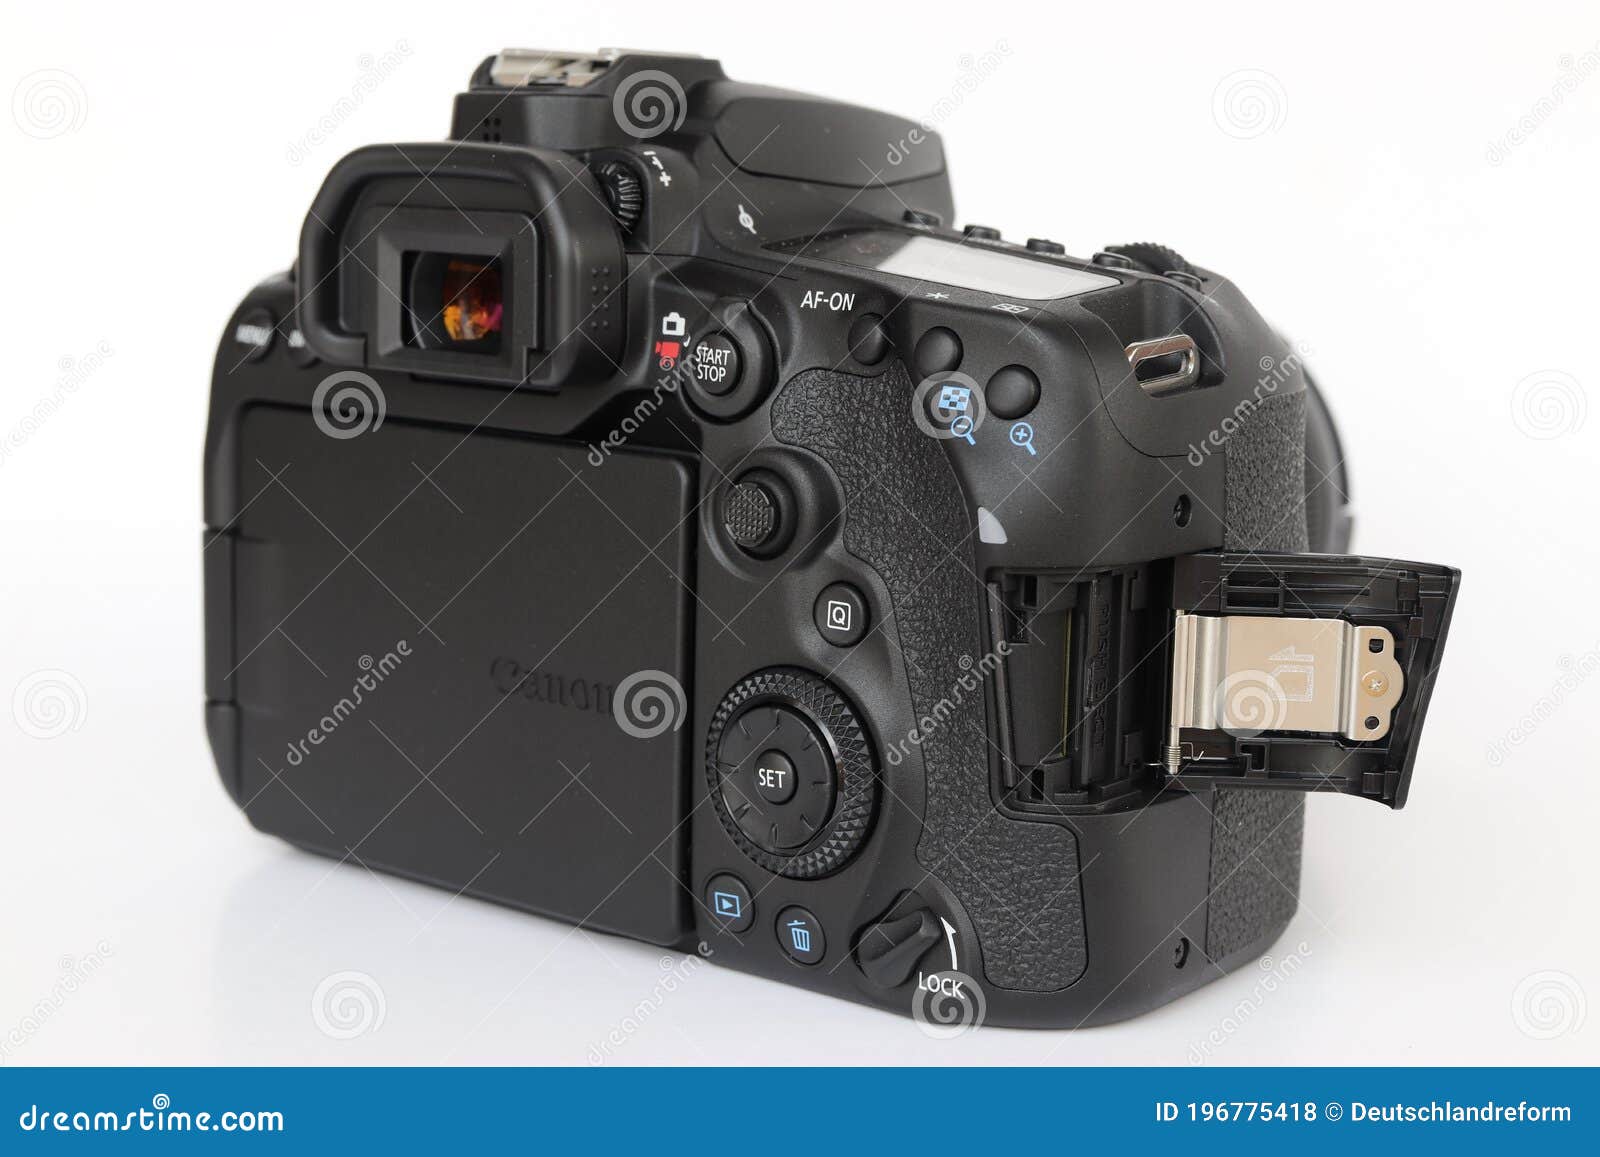 Canon Eos 90d With Ef S 18 135mm F 3 5 5 6 Is Usm Lens Editorial Stock Photo Image Of Digital Close